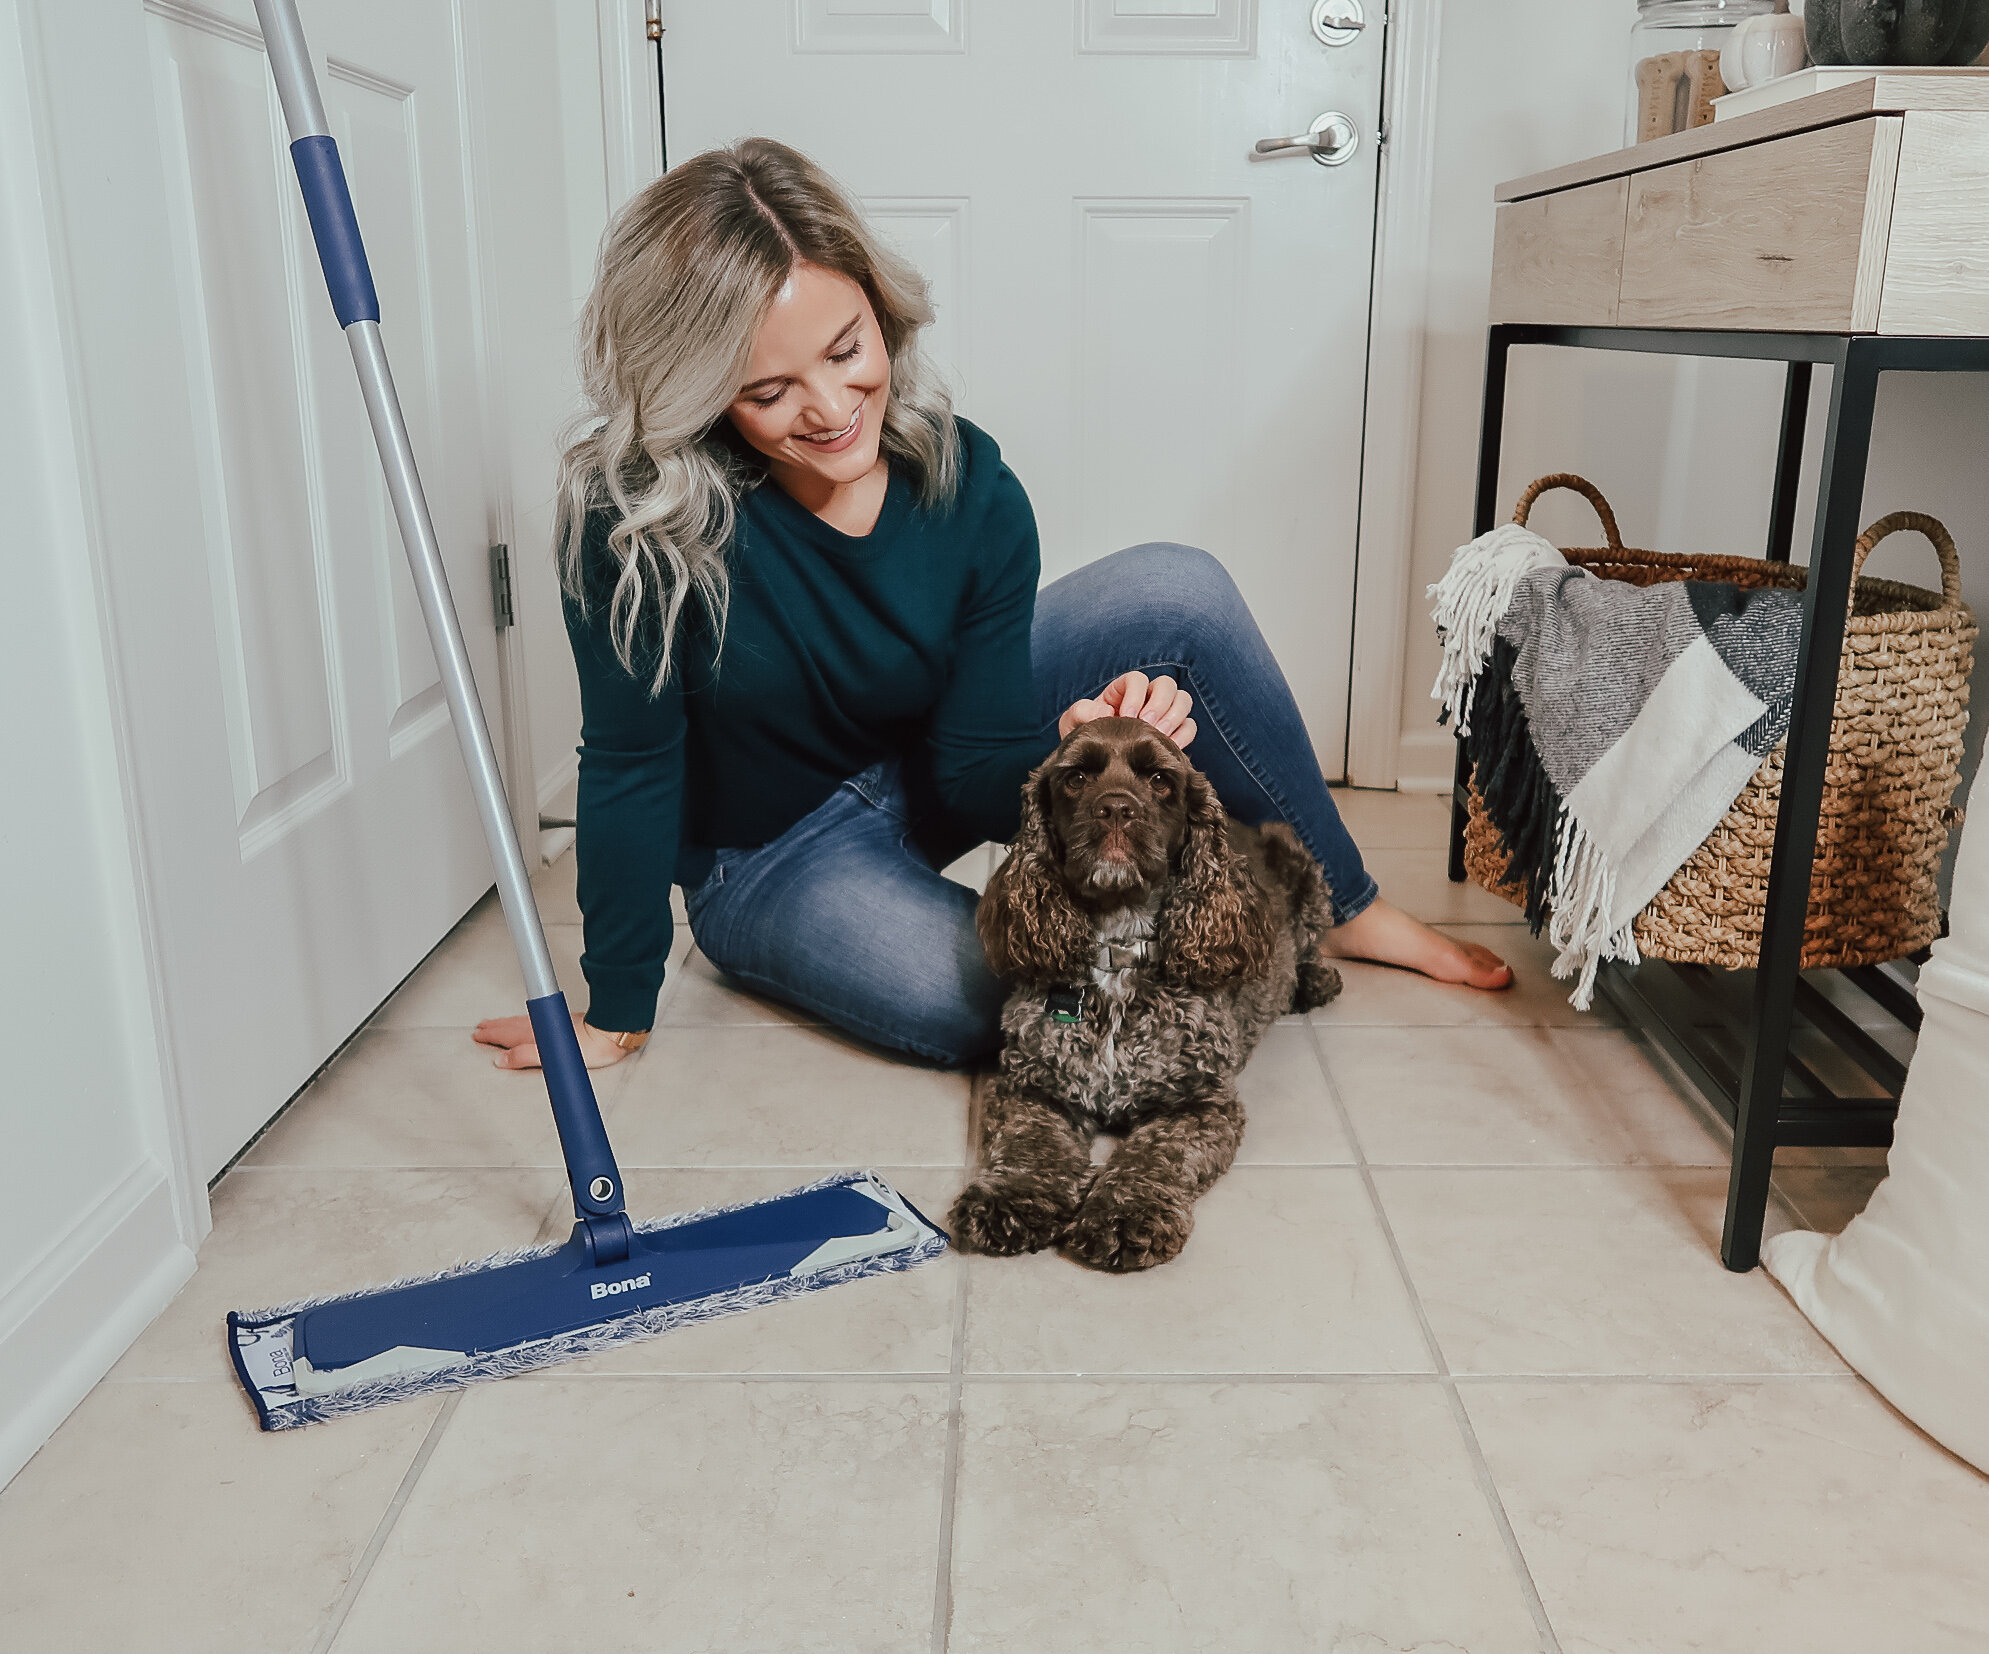 THE SIMPLE WAY TO KEEP YOUR FLOORS CLEAN — SAM and NATE